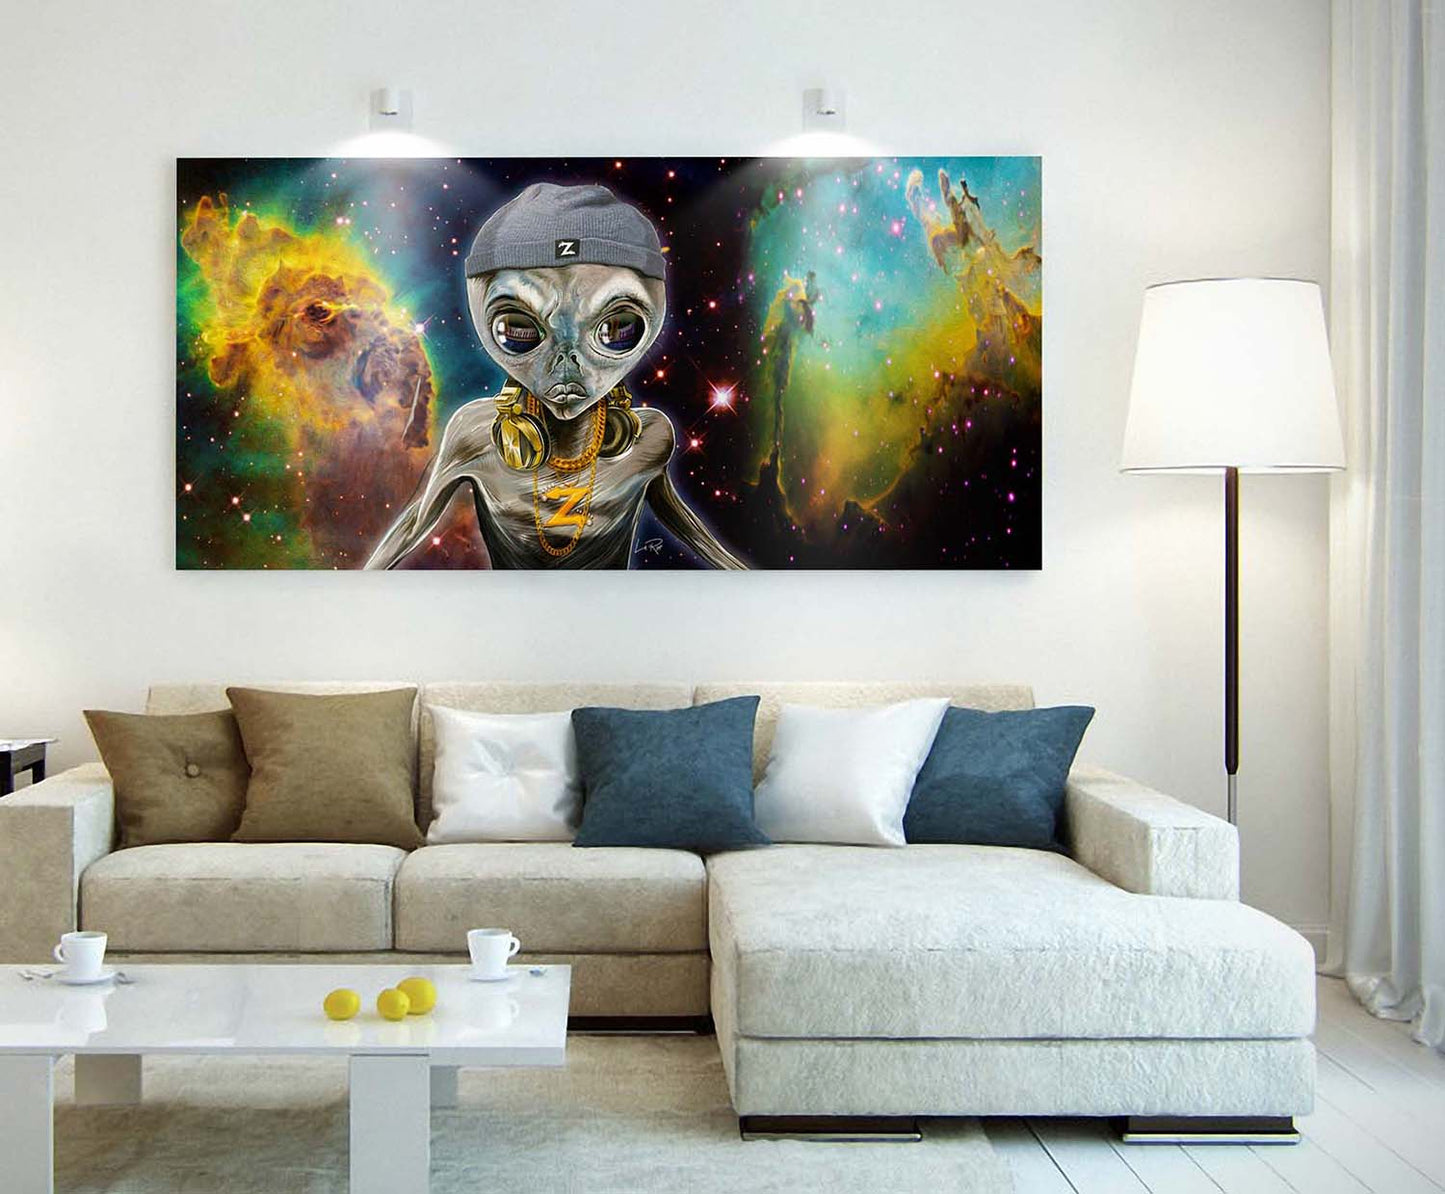 DJ Zedd the alien mix master mixed media by Doug LaRue on a wall in a living room over the couch